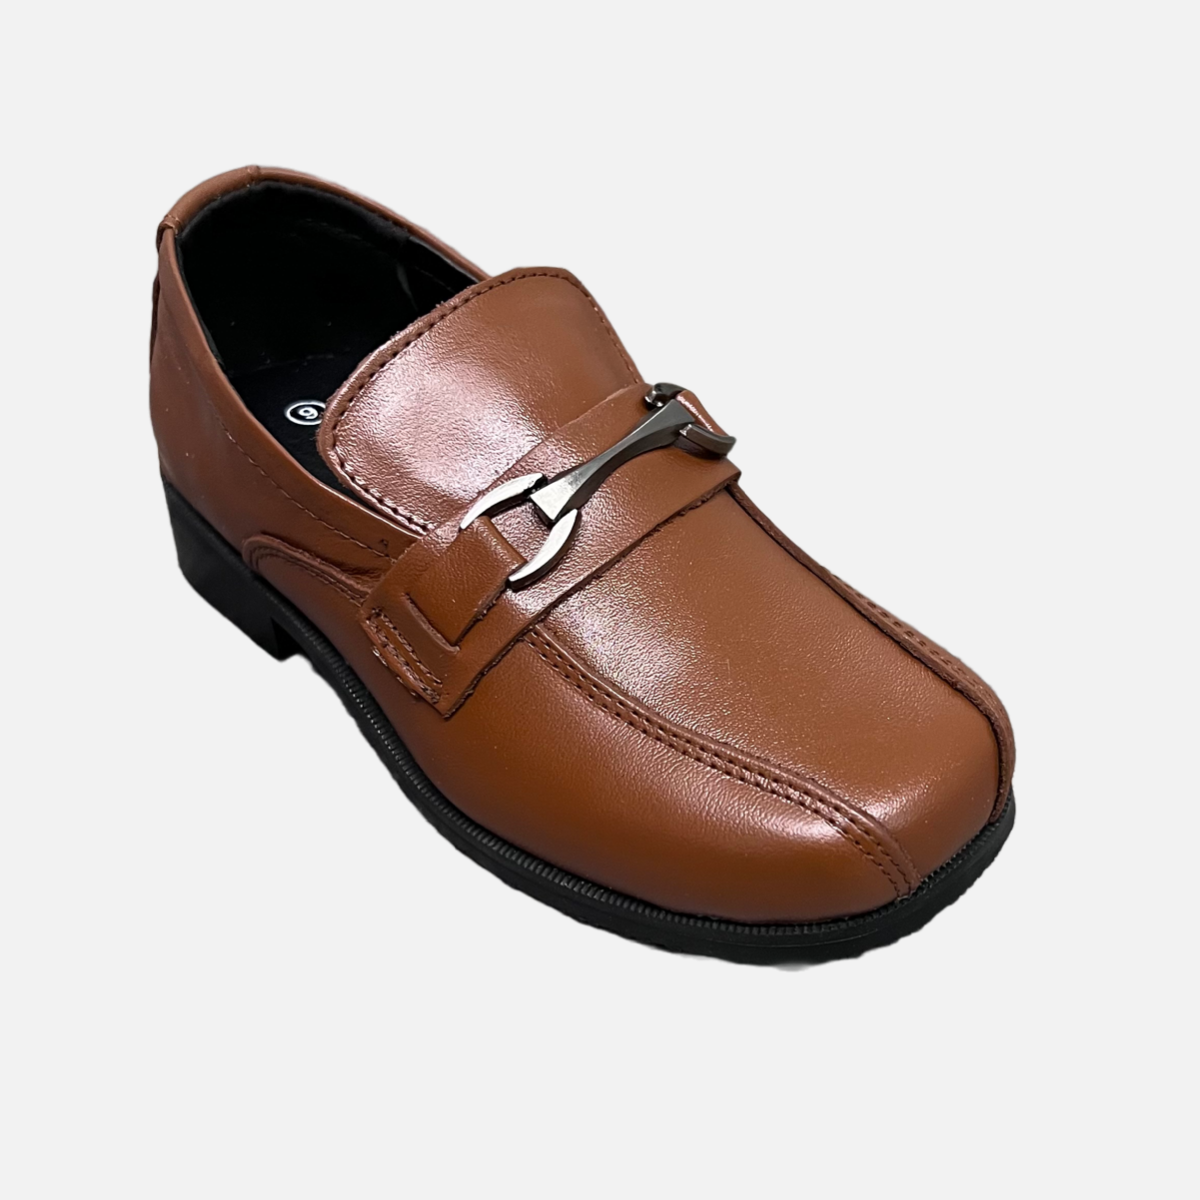 Fancy Kids Brown Leather Loafer with Buckle Accent